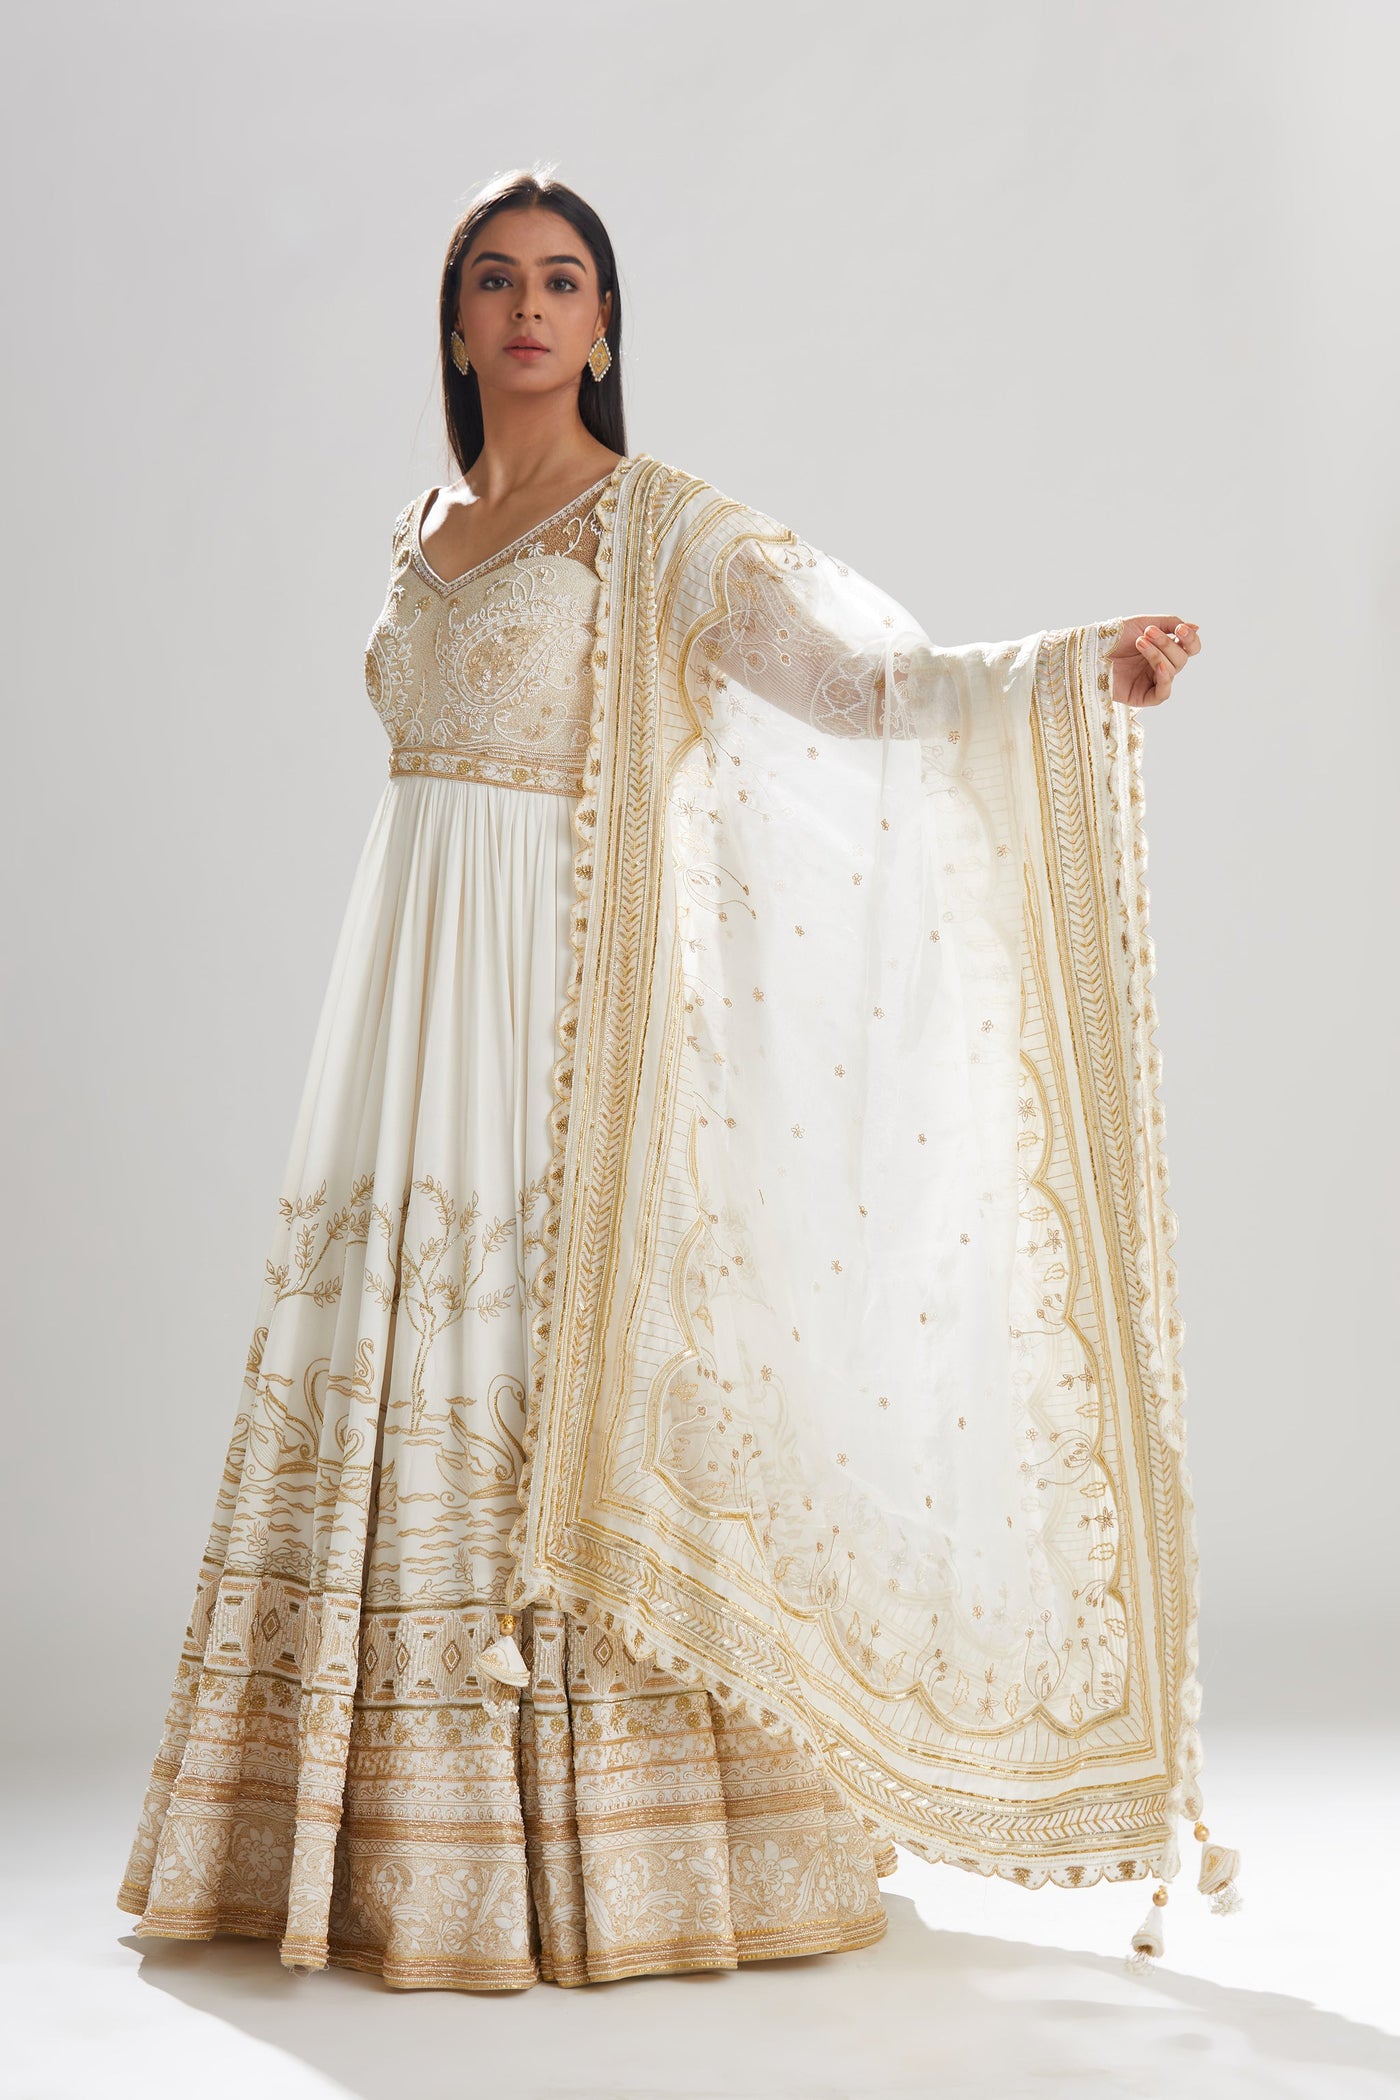 Hans Anarkali With Dupatta - Indian Clothing in Denver, CO, Aurora, CO, Boulder, CO, Fort Collins, CO, Colorado Springs, CO, Parker, CO, Highlands Ranch, CO, Cherry Creek, CO, Centennial, CO, and Longmont, CO. Nationwide shipping USA - India Fashion X